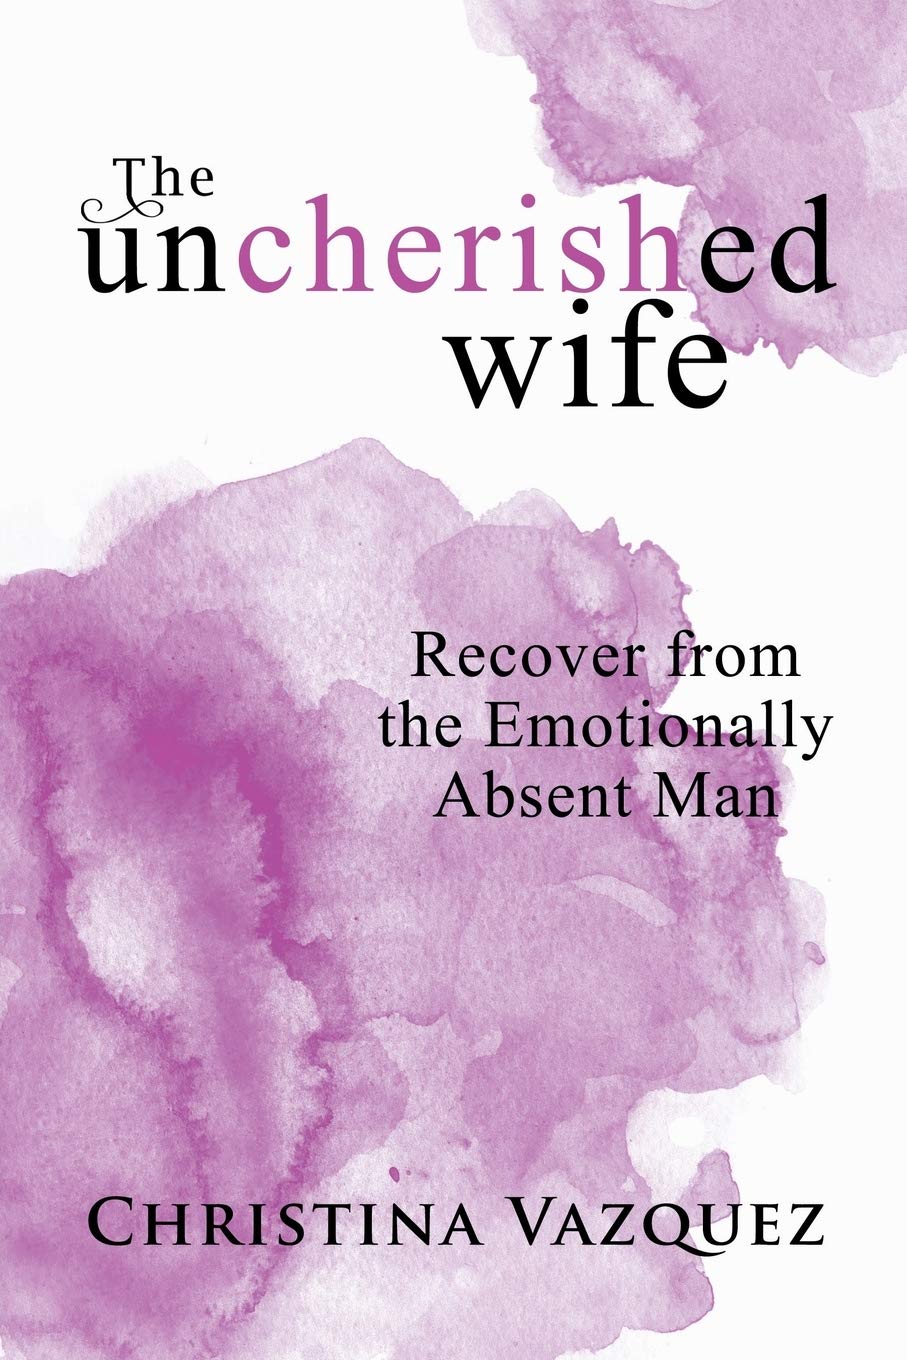 Author’s Tranquility Press, Christina Vazquez Teaches Recovery from the Emotionally Absent Man In The Uncherished Wife